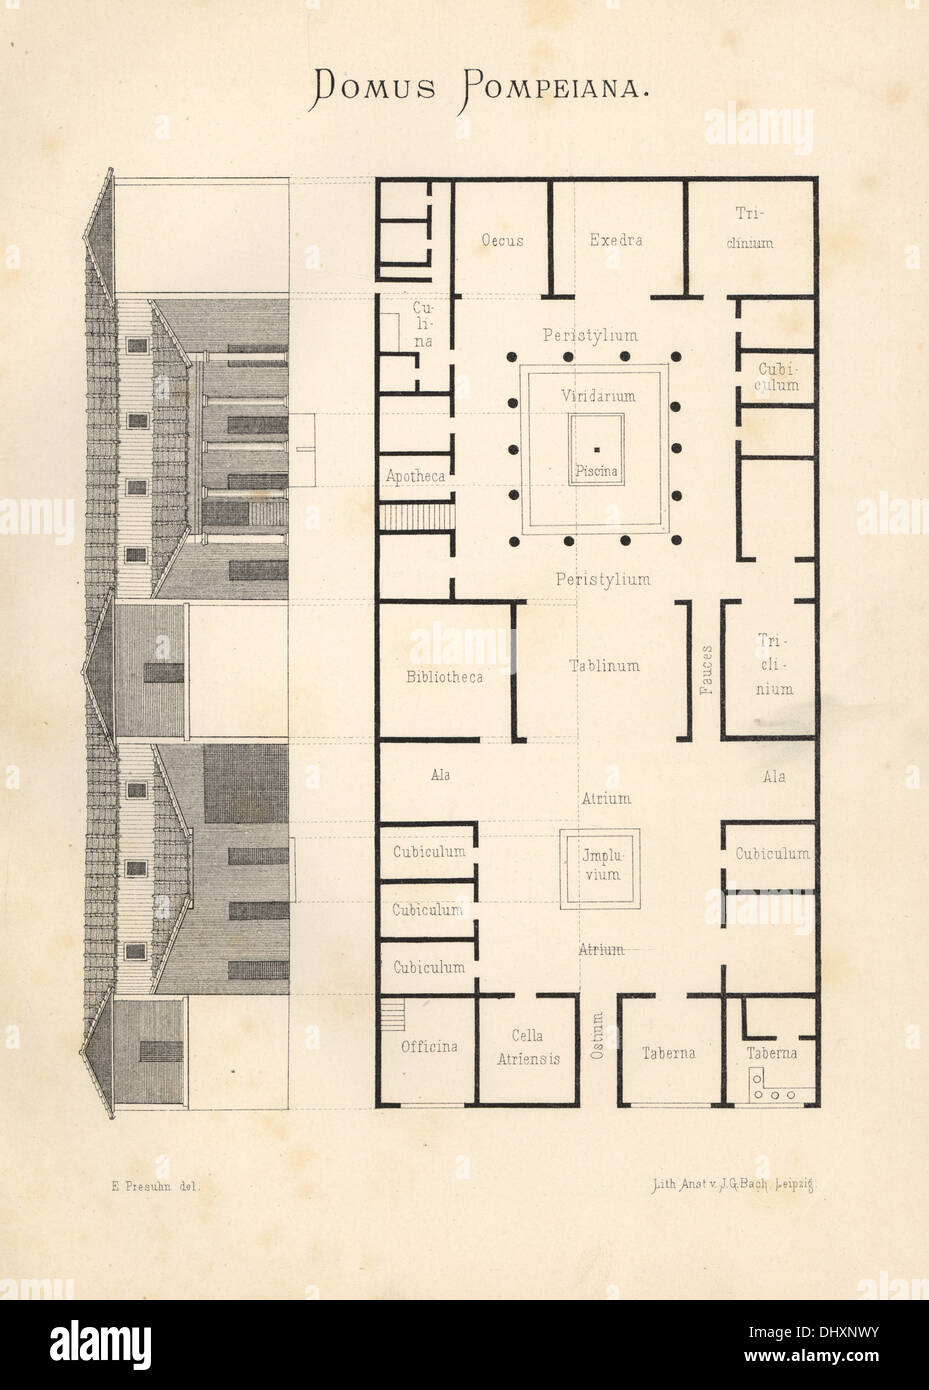 Domus Pompeiana Floor Plan And Elevation Of A Luxurious House In